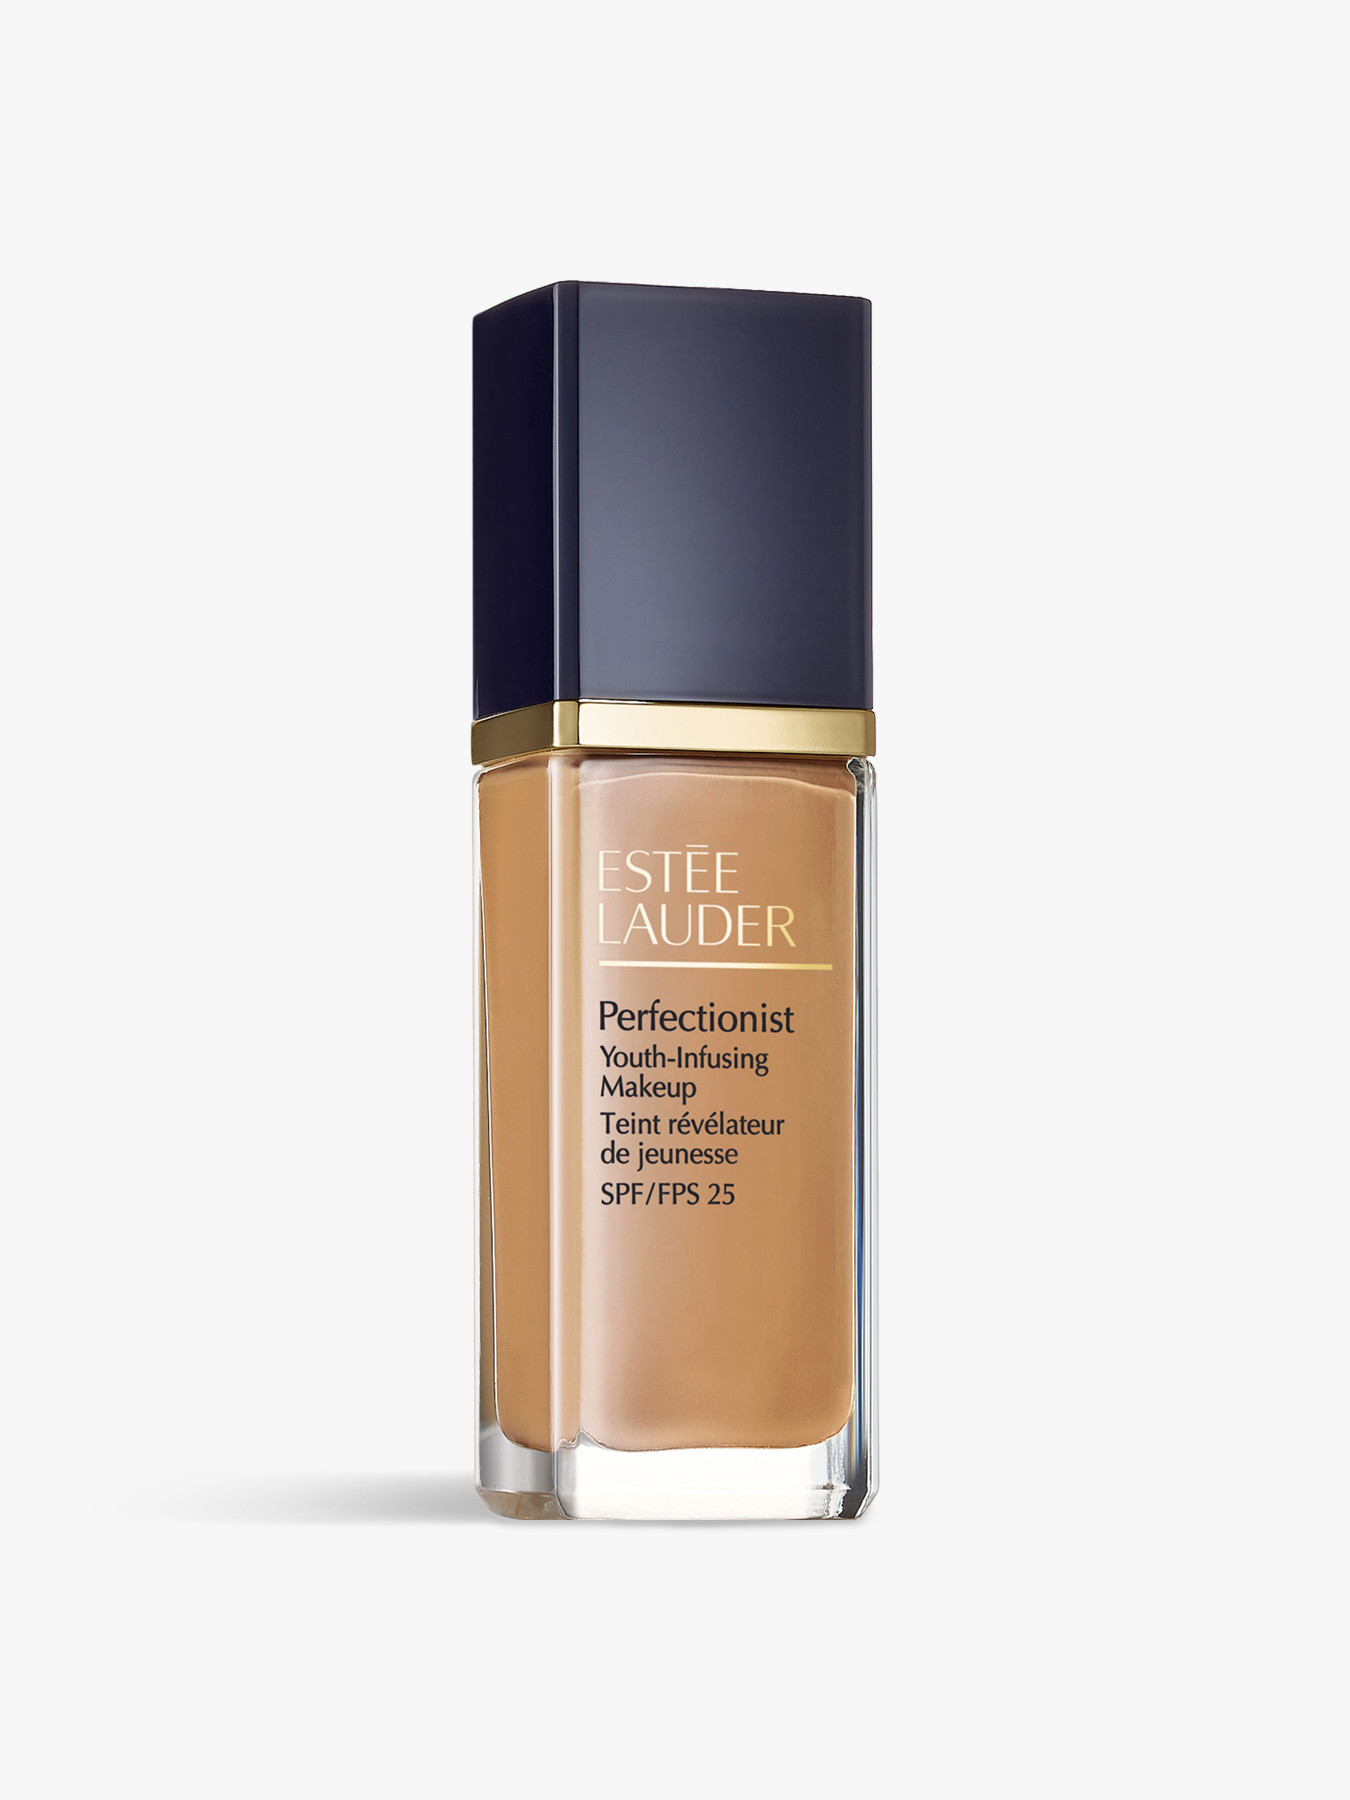 Estée Lauder Perfectionist Youth-Infusing Serum Makeup Spf 25 ingredients (Explained)